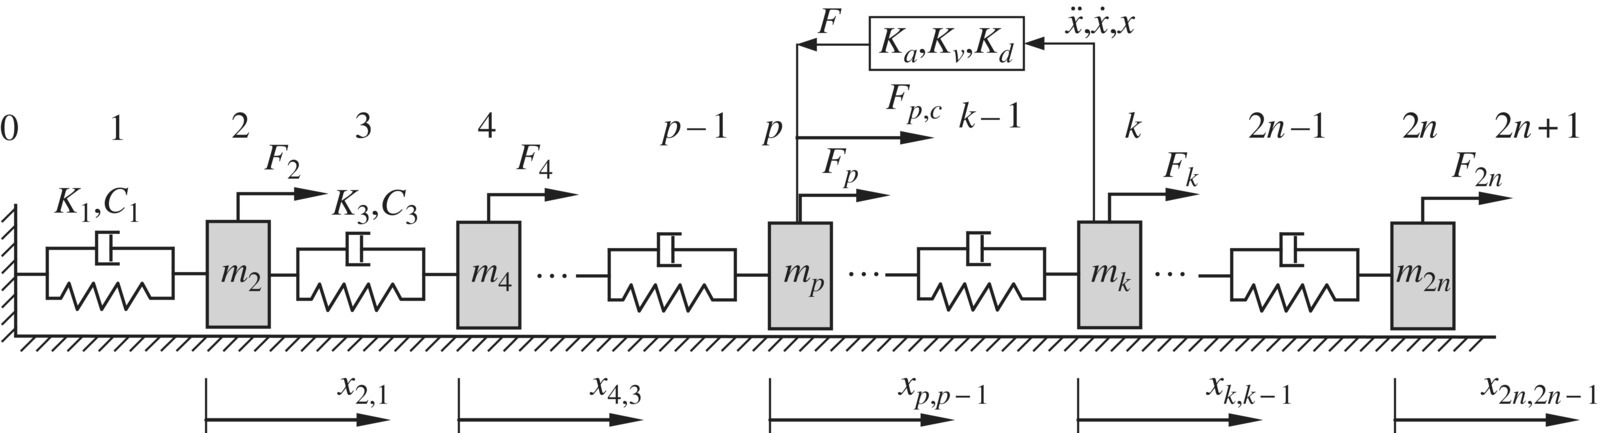 Dynamic model of a linear controlled multibody system with series of boxes labeled m2, m4, mp, mk, and m2n connected by spring and damper, with rightward arrows at the bottom for x2,1; x4,3; xp,p−1; xk,k−1; etc.